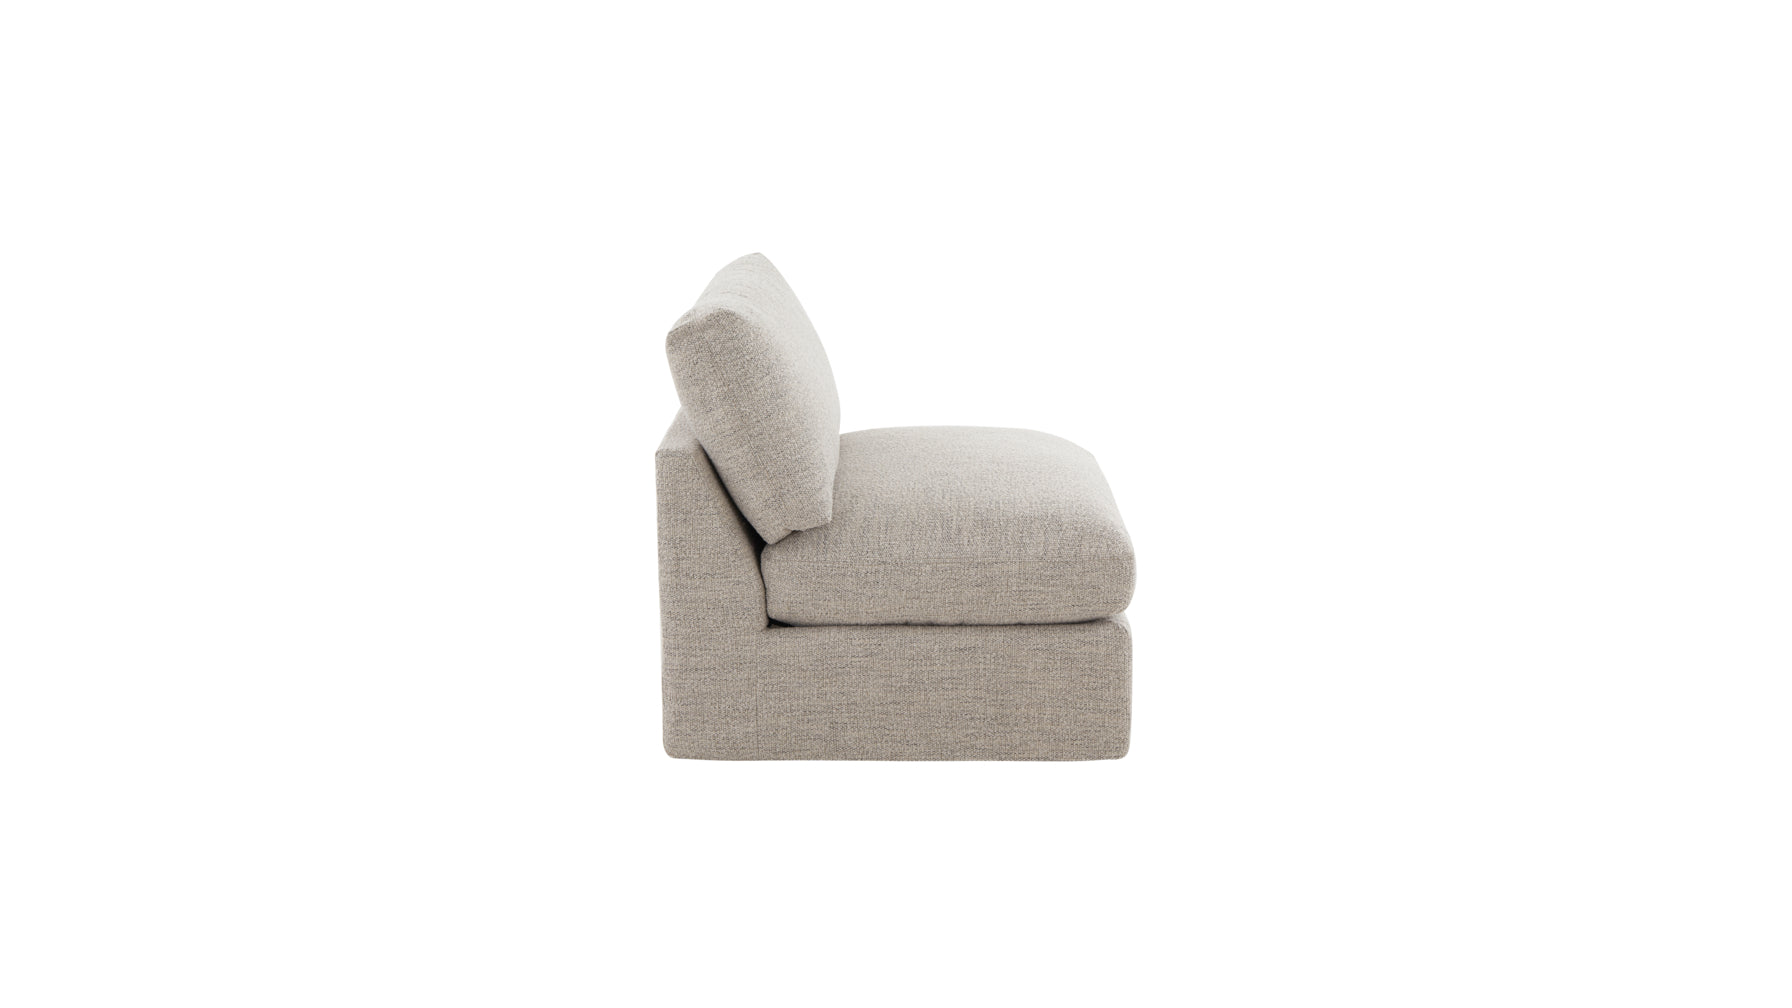 Get Together™ Armless Chair, Standard, Oatmeal - Image 5